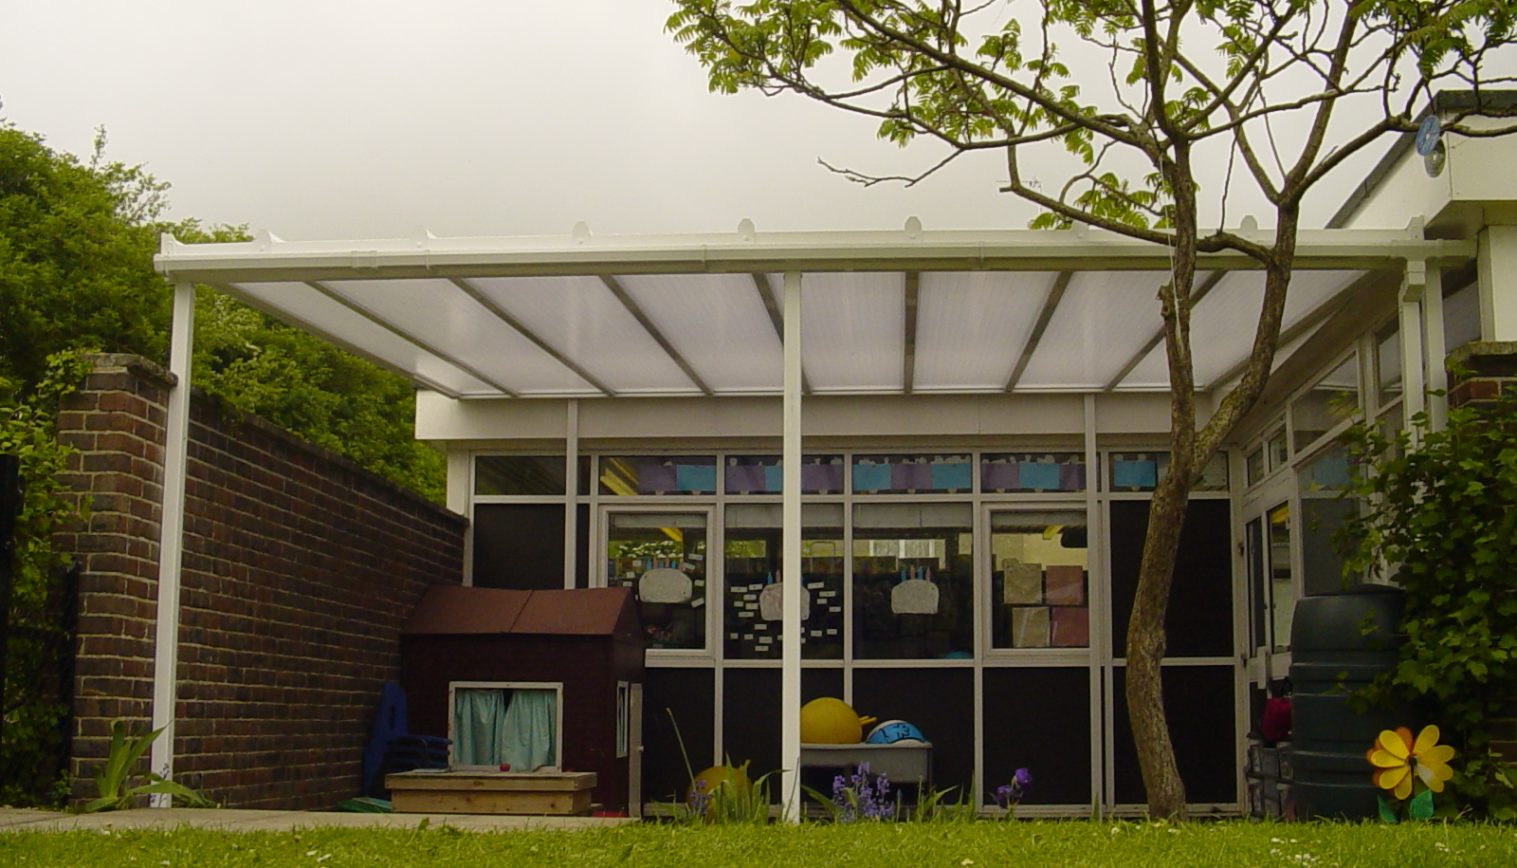 St Nicholas C of E Infant School – Wall Mounted Canopy